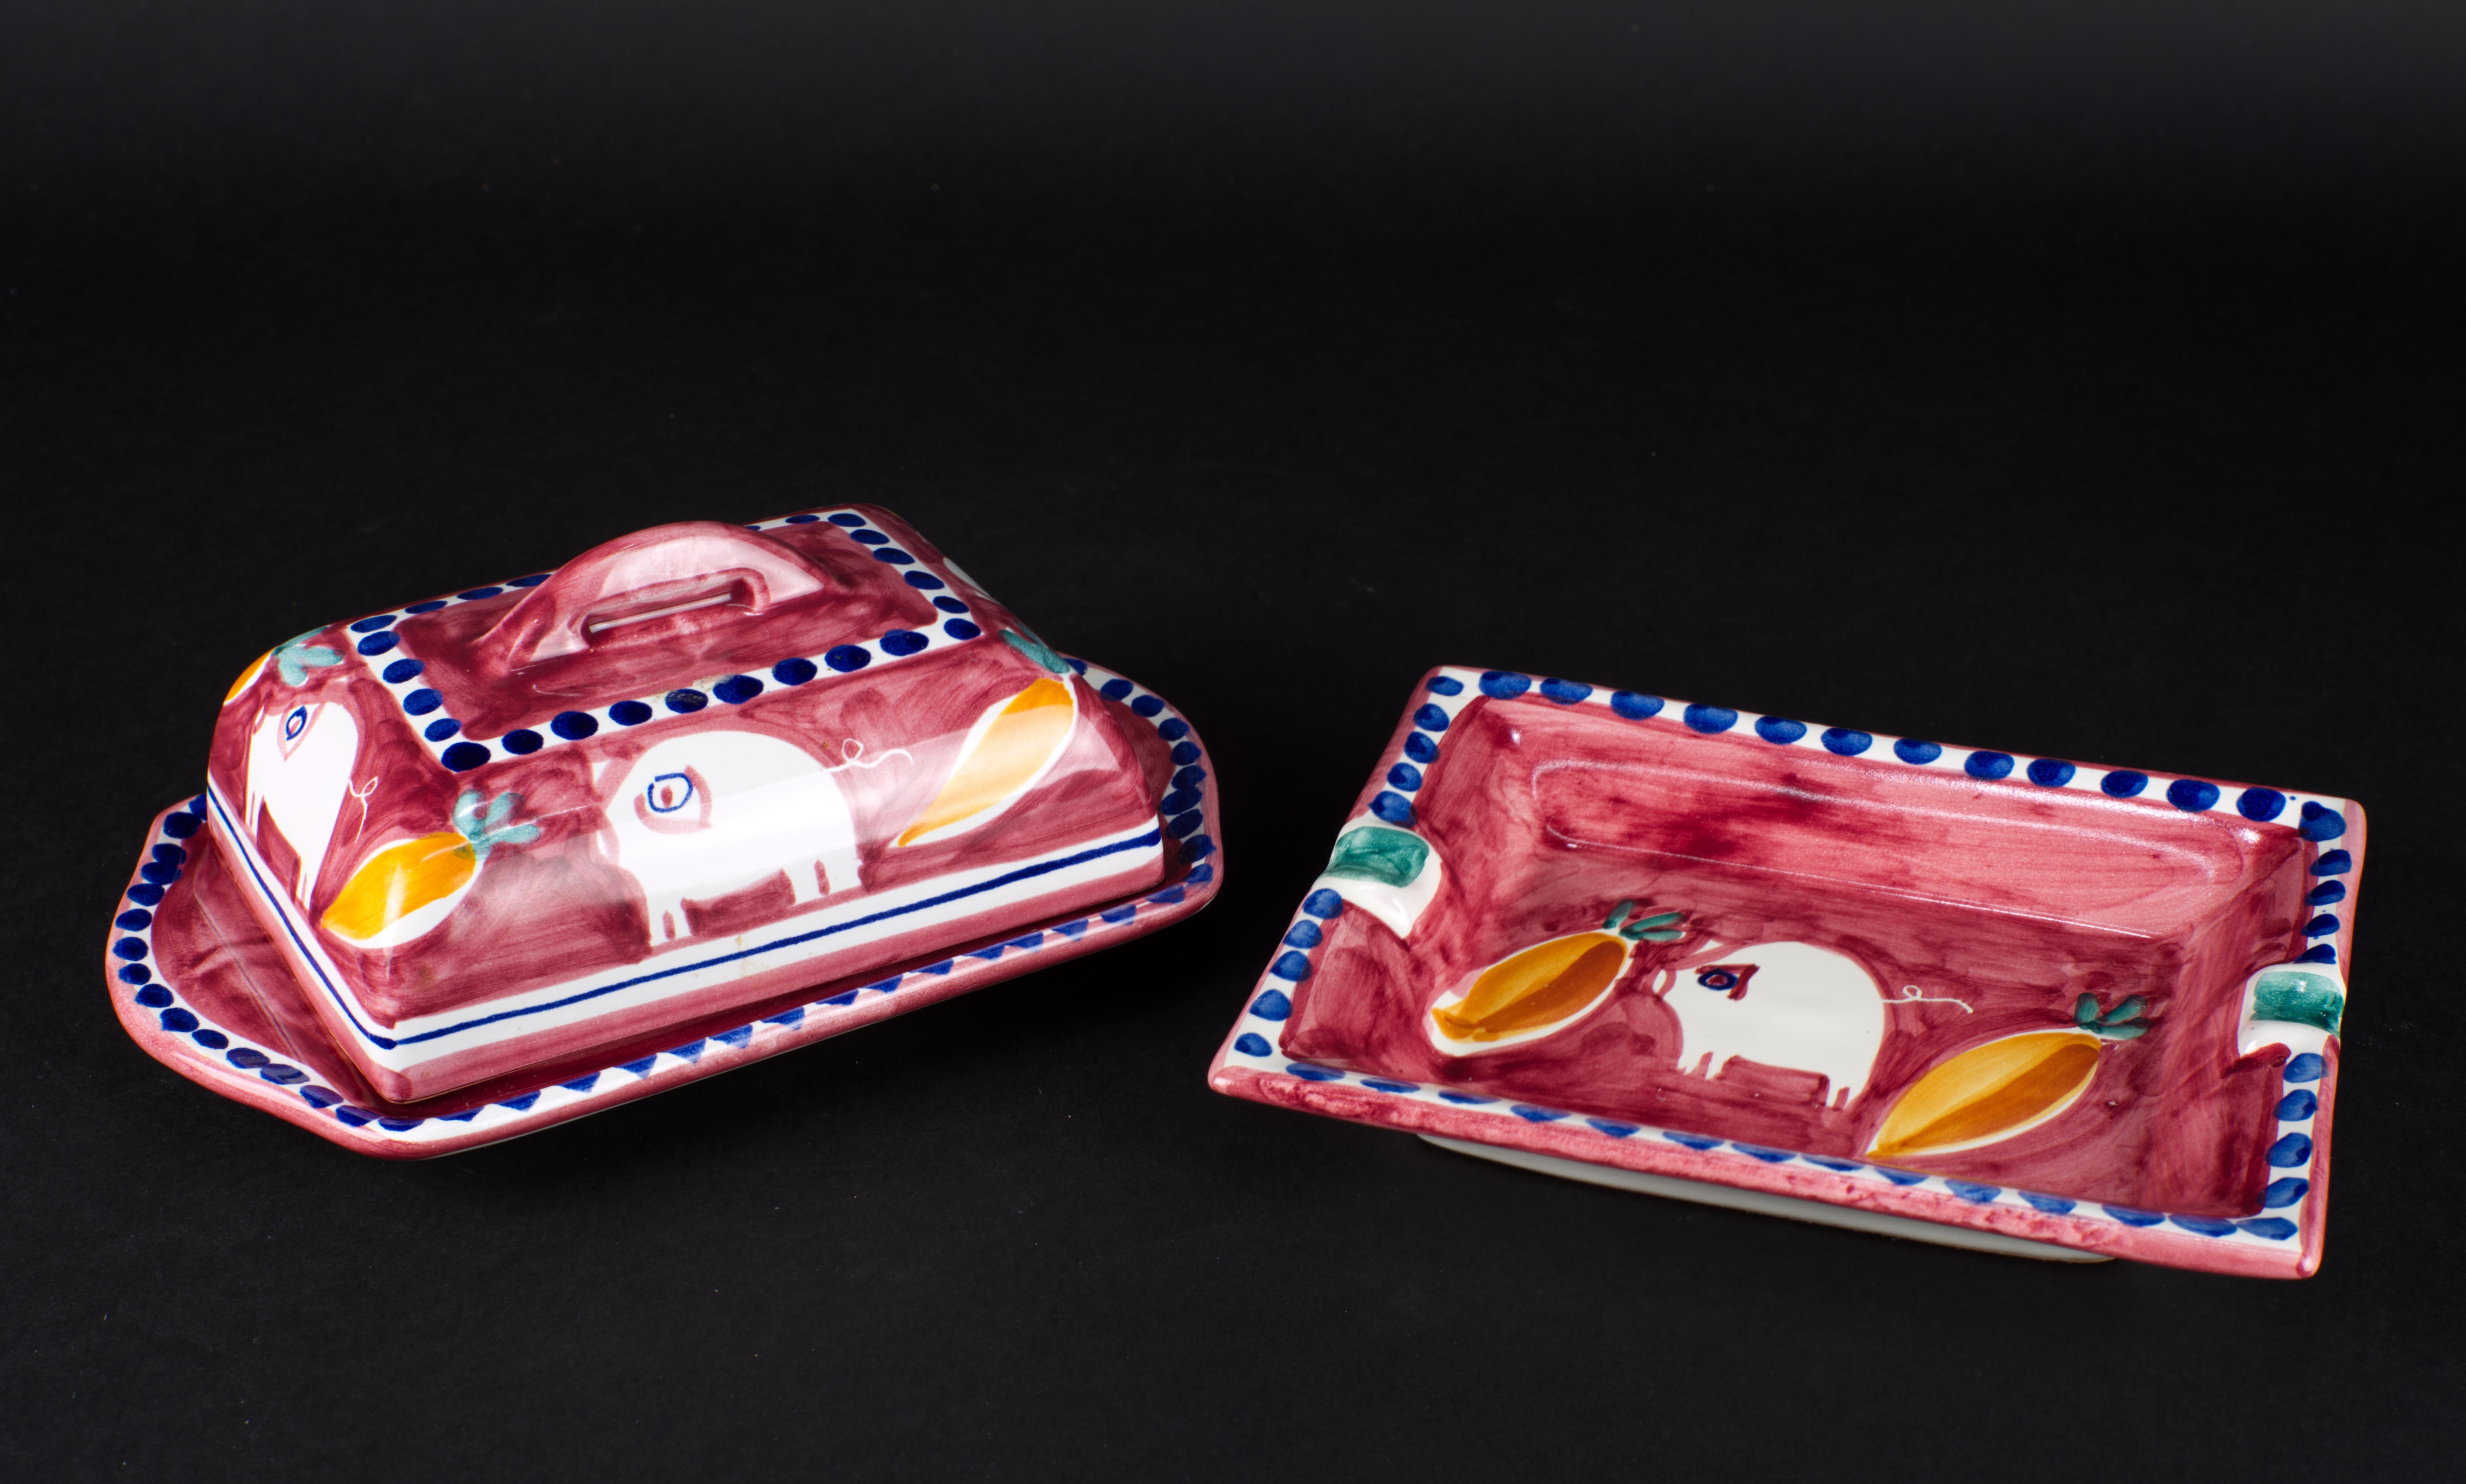  Set of butter dish and rectangular tray were handmade of high fired terra cotta by Ceramica Artistica Solimene in Vietri, Italy. The pieces are hand painted in their trademark Decoro Campagna (Country Style) pattern that consists of different